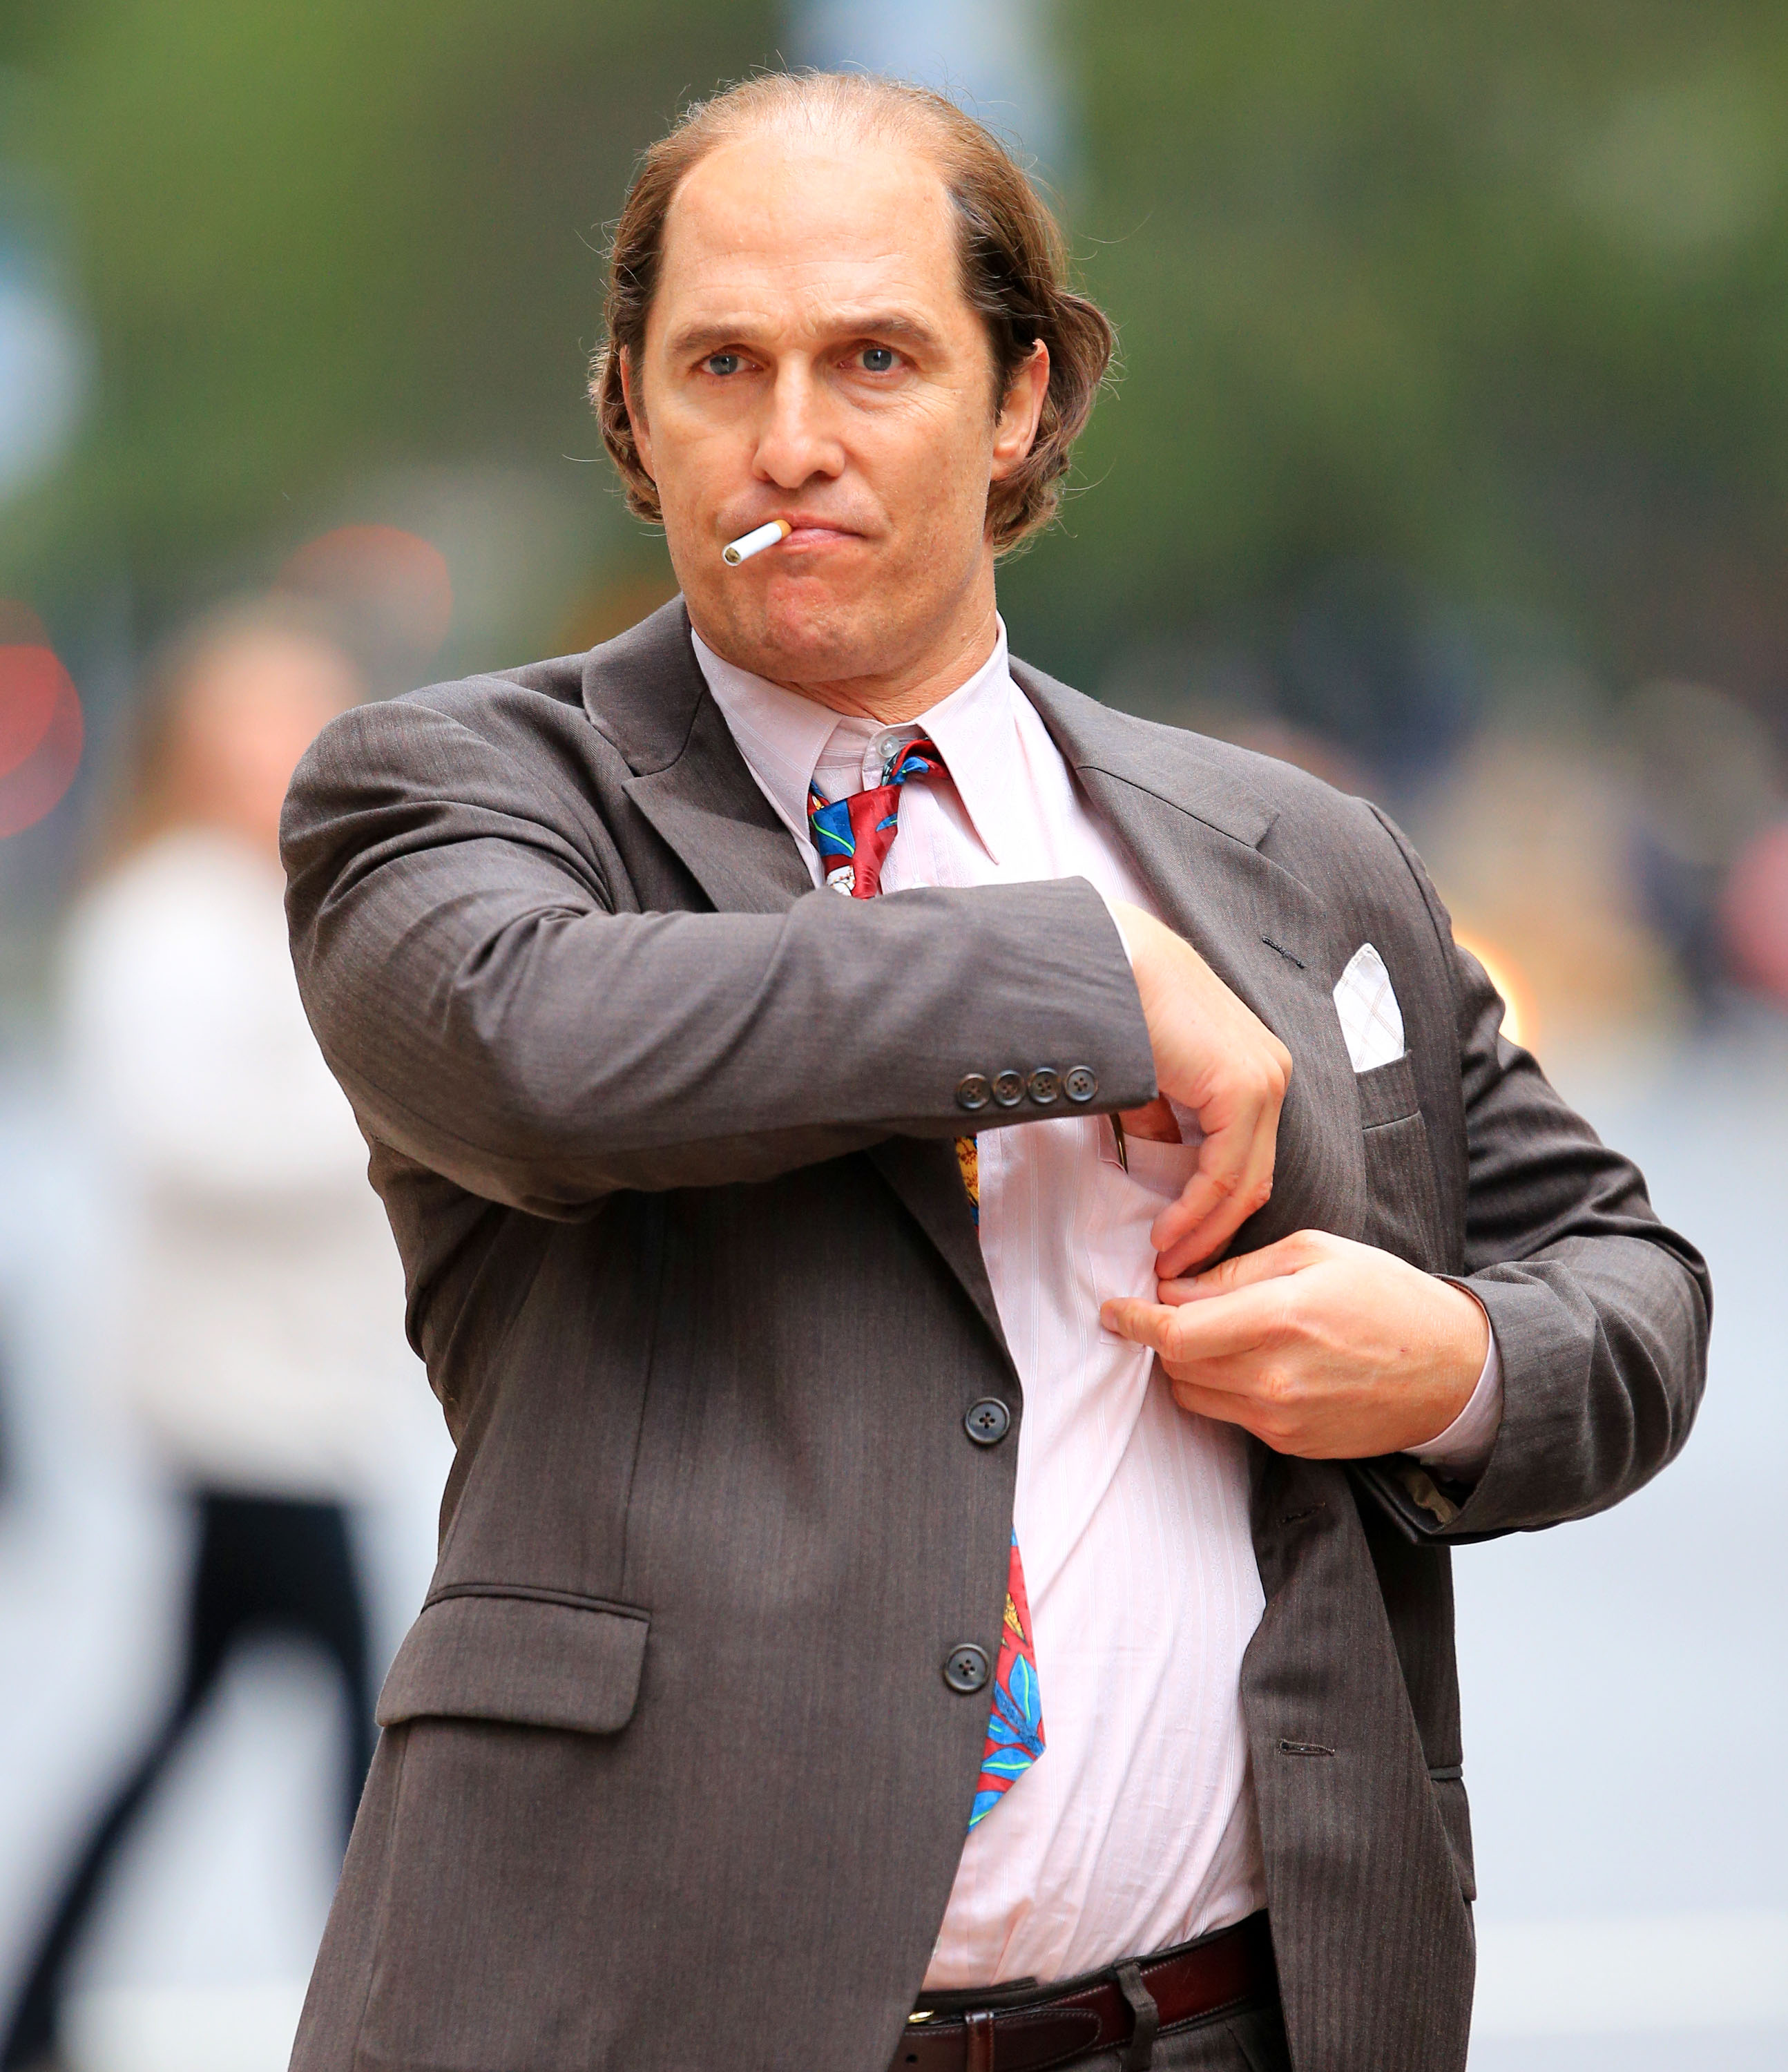 McConaughey gained nearly fifty pounds for his role in "Gold" (Photo credit: Splash News)